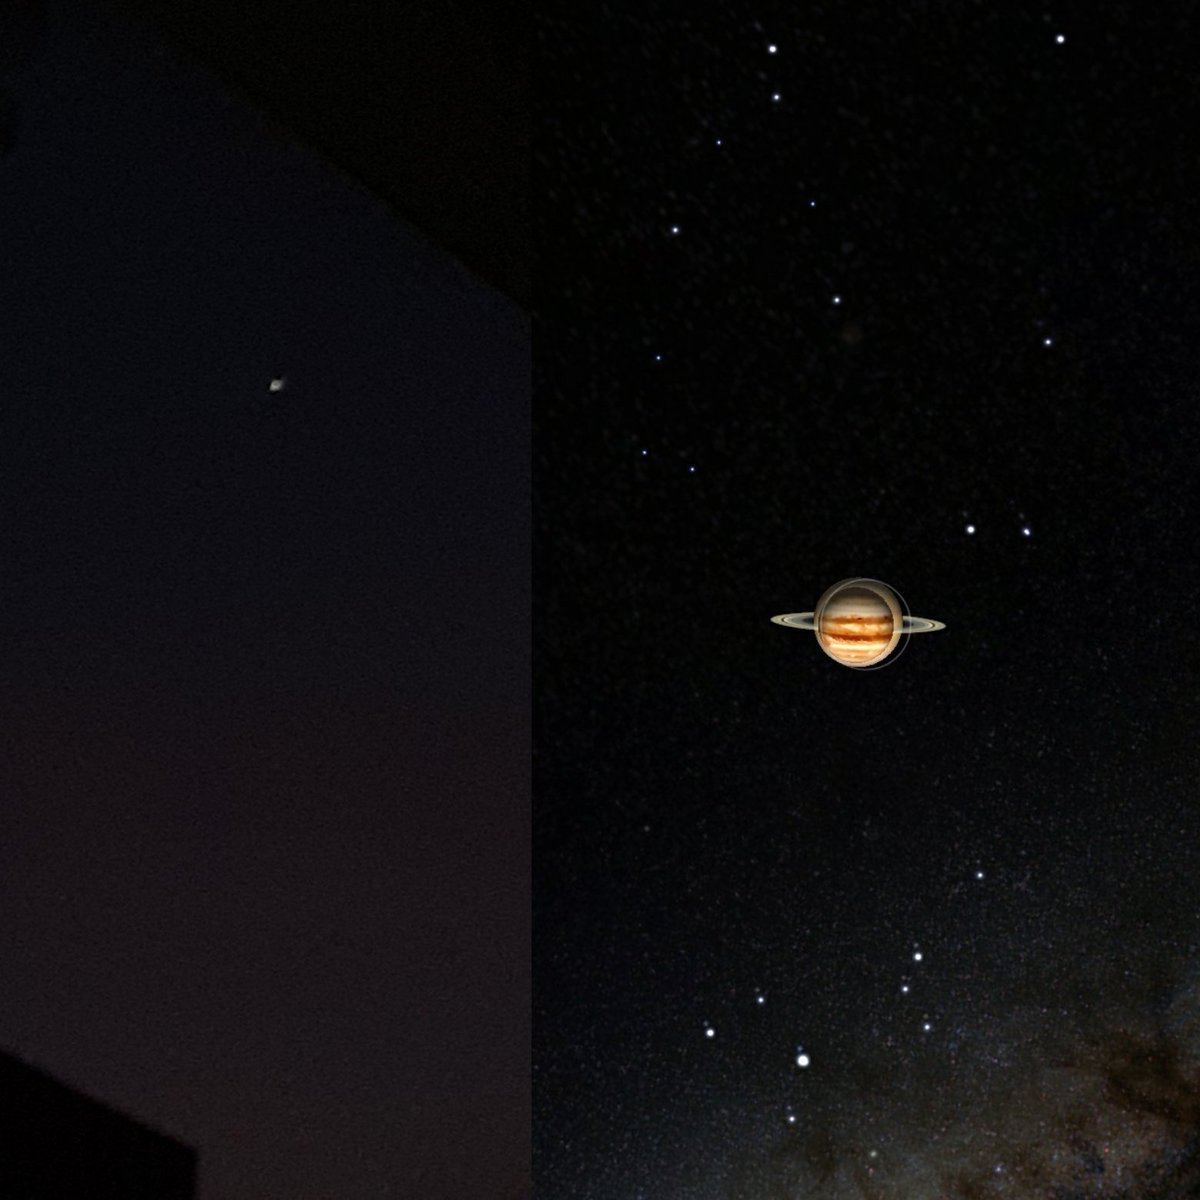 Saw this amazing phenomenon which happened after almost 700 yrs! #SaturnJupiterConjunction 💫🪐
Absolute delight! 😍
The pic on the left is what I saw was clearer through the binoculars though, The right is the snapshot from the app #SkyView #SkyViewApp